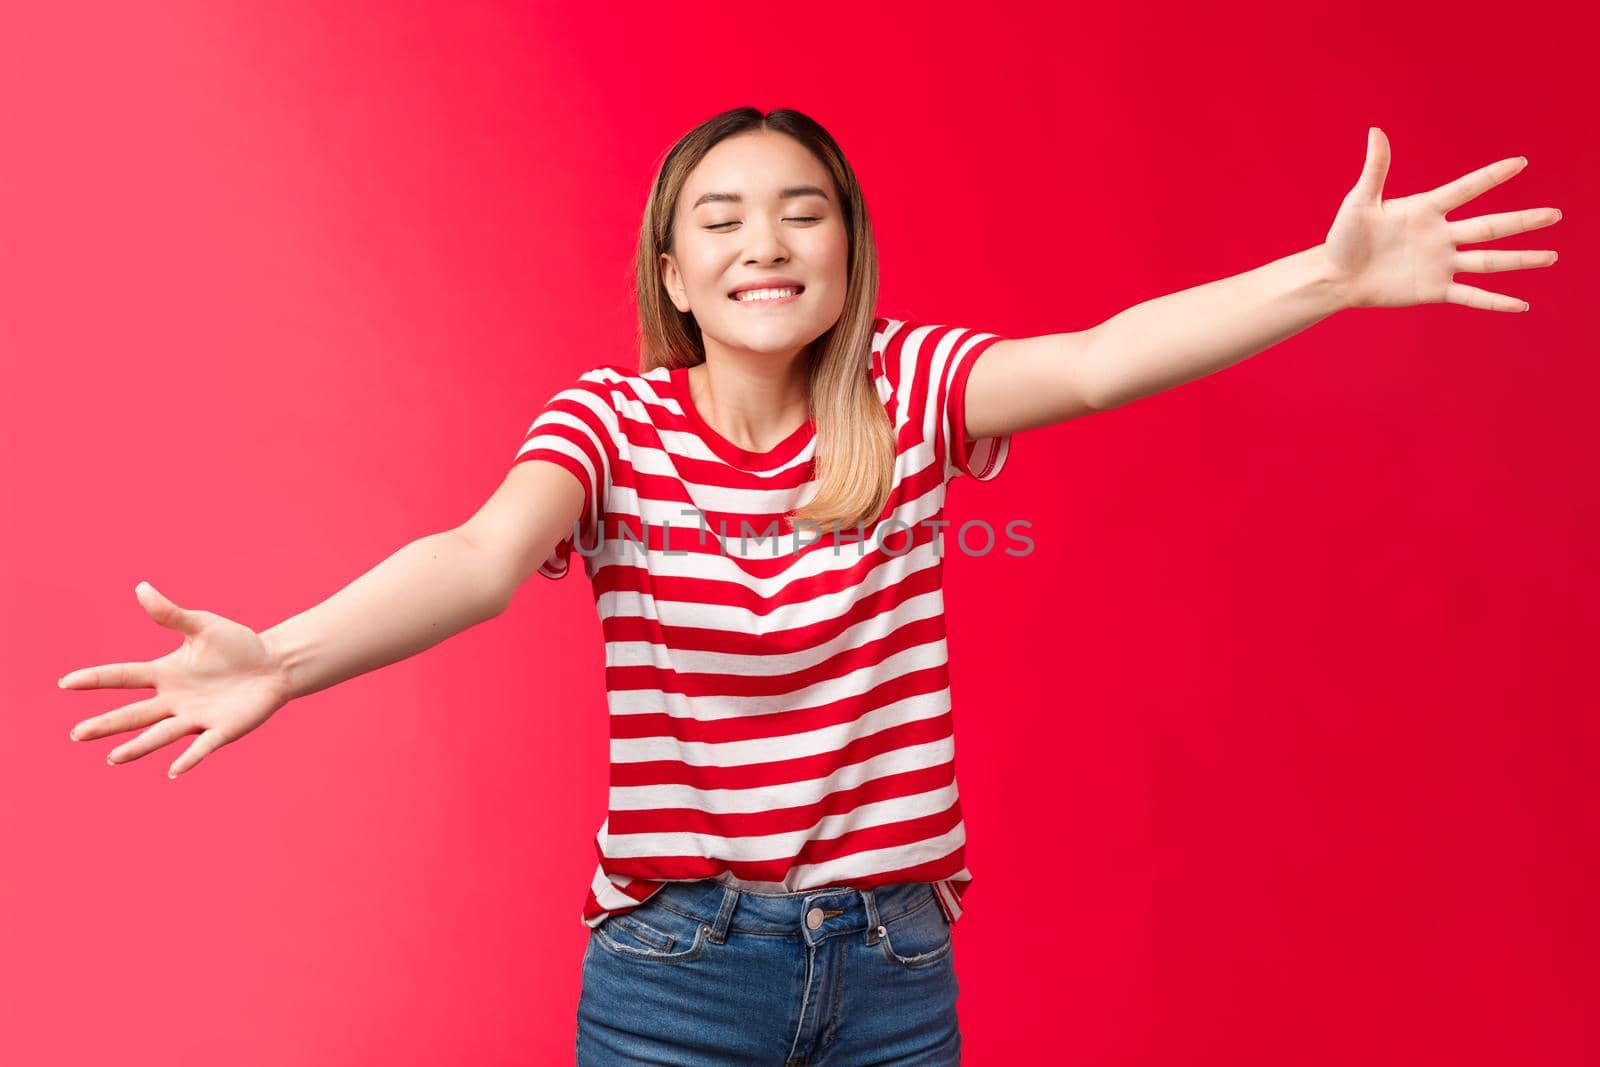 Silly friendly-looking tender blond asian girl close eyes smiling broadly toothy upbeat smile extend arms, wanna give tight hug, reach camera move forward cuddle best friend, red background.